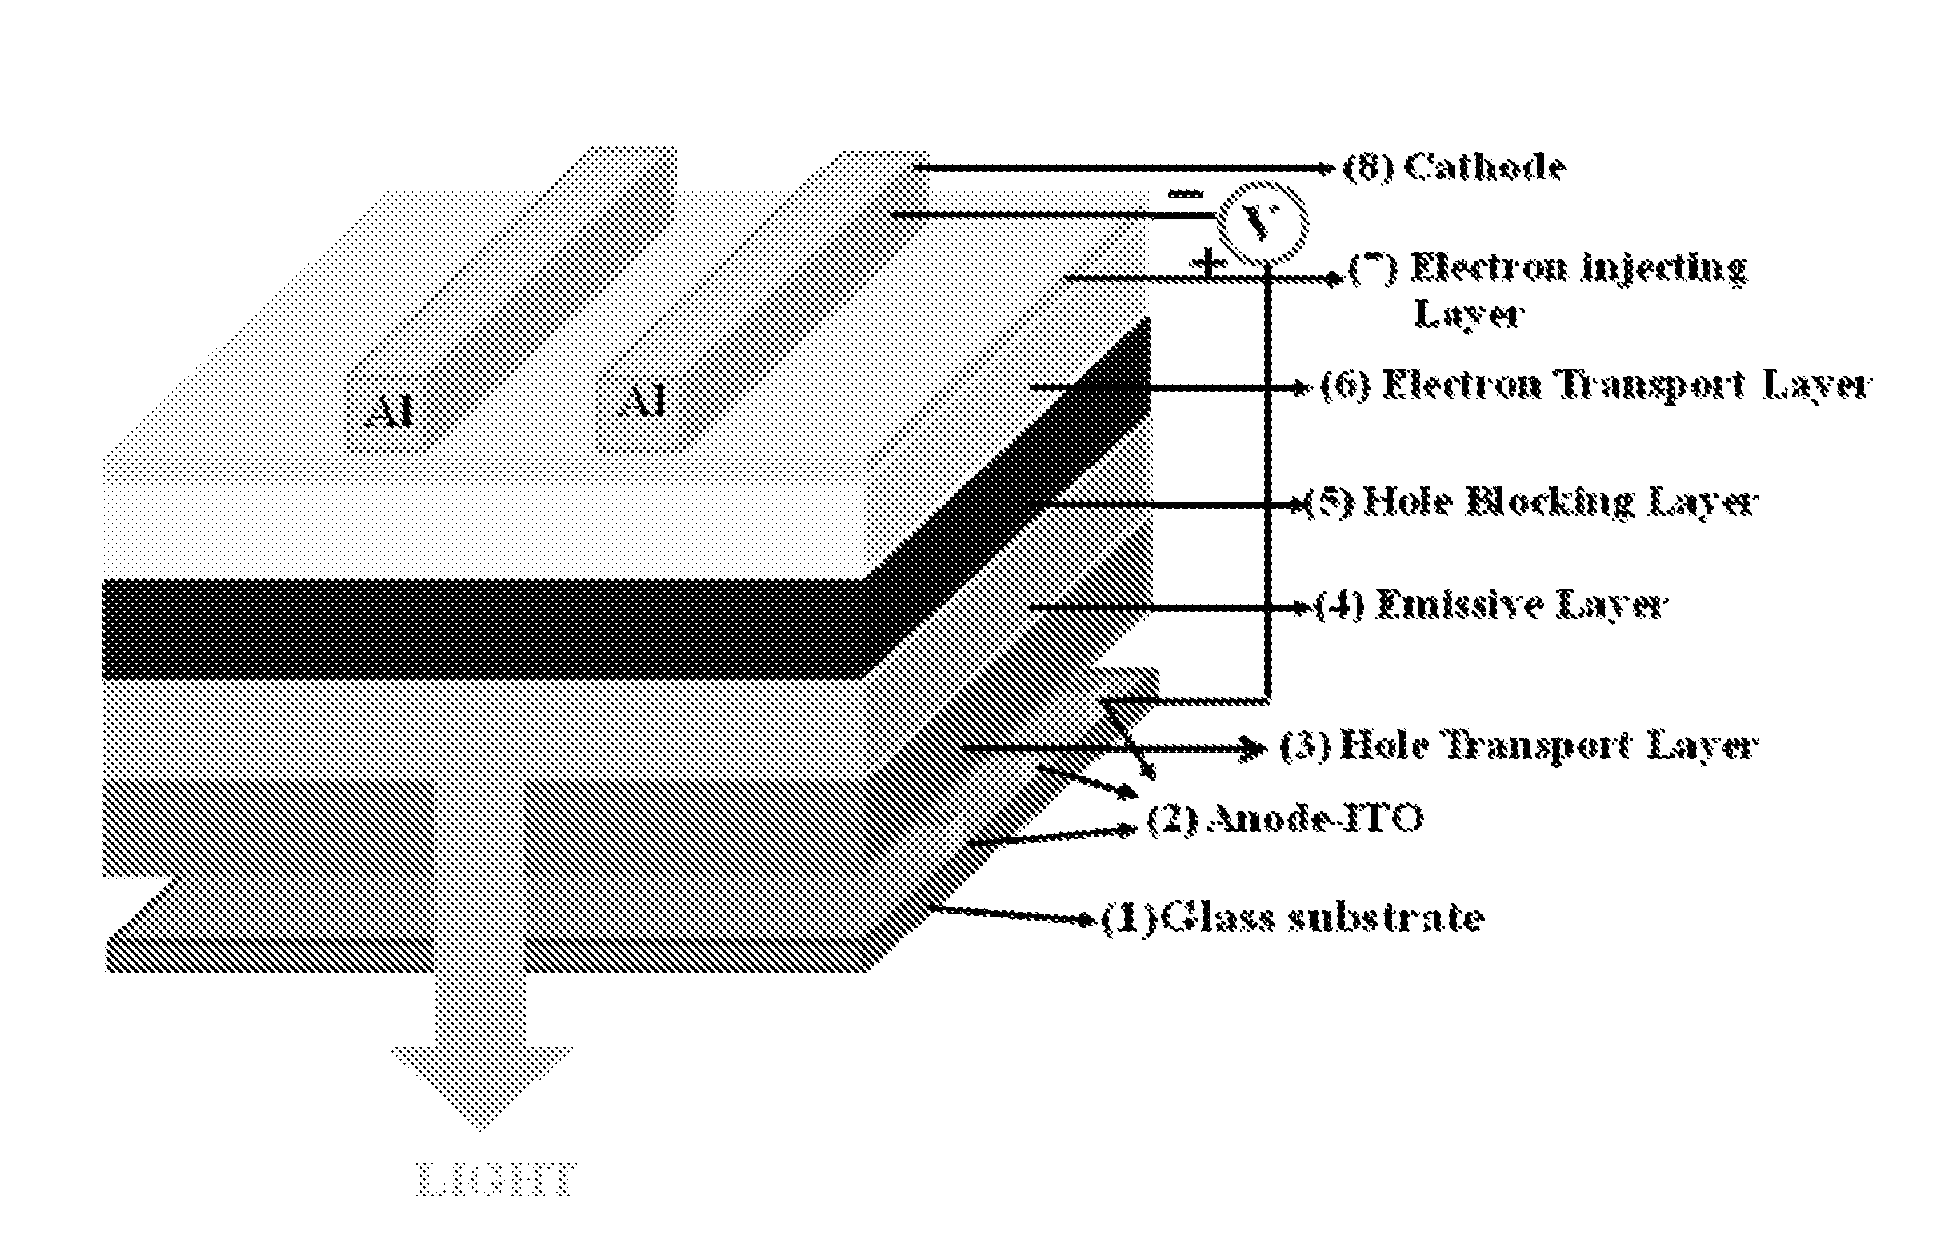 Lithium metal quinolates and process for preparation thereof as good emitting, interface materials as well as n-type dopent for organic electronic devices